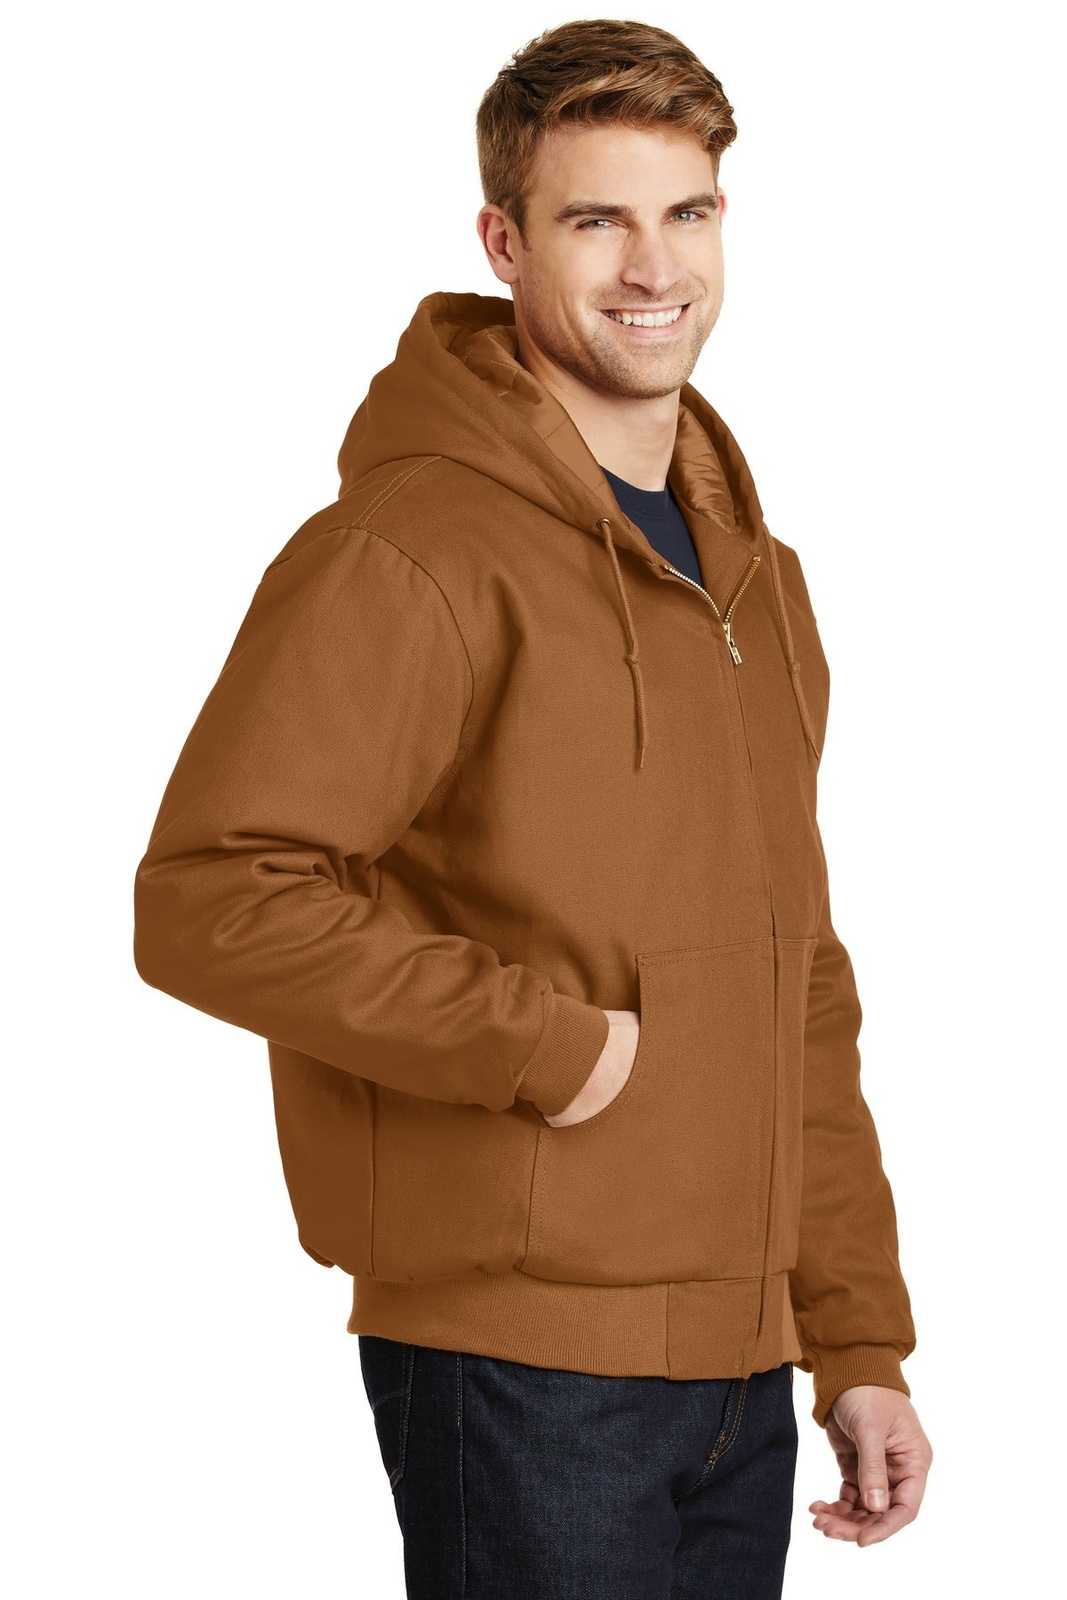 CornerStone J763H Duck Cloth Hooded Work Jacket - Duck Brown - HIT a Double - 4